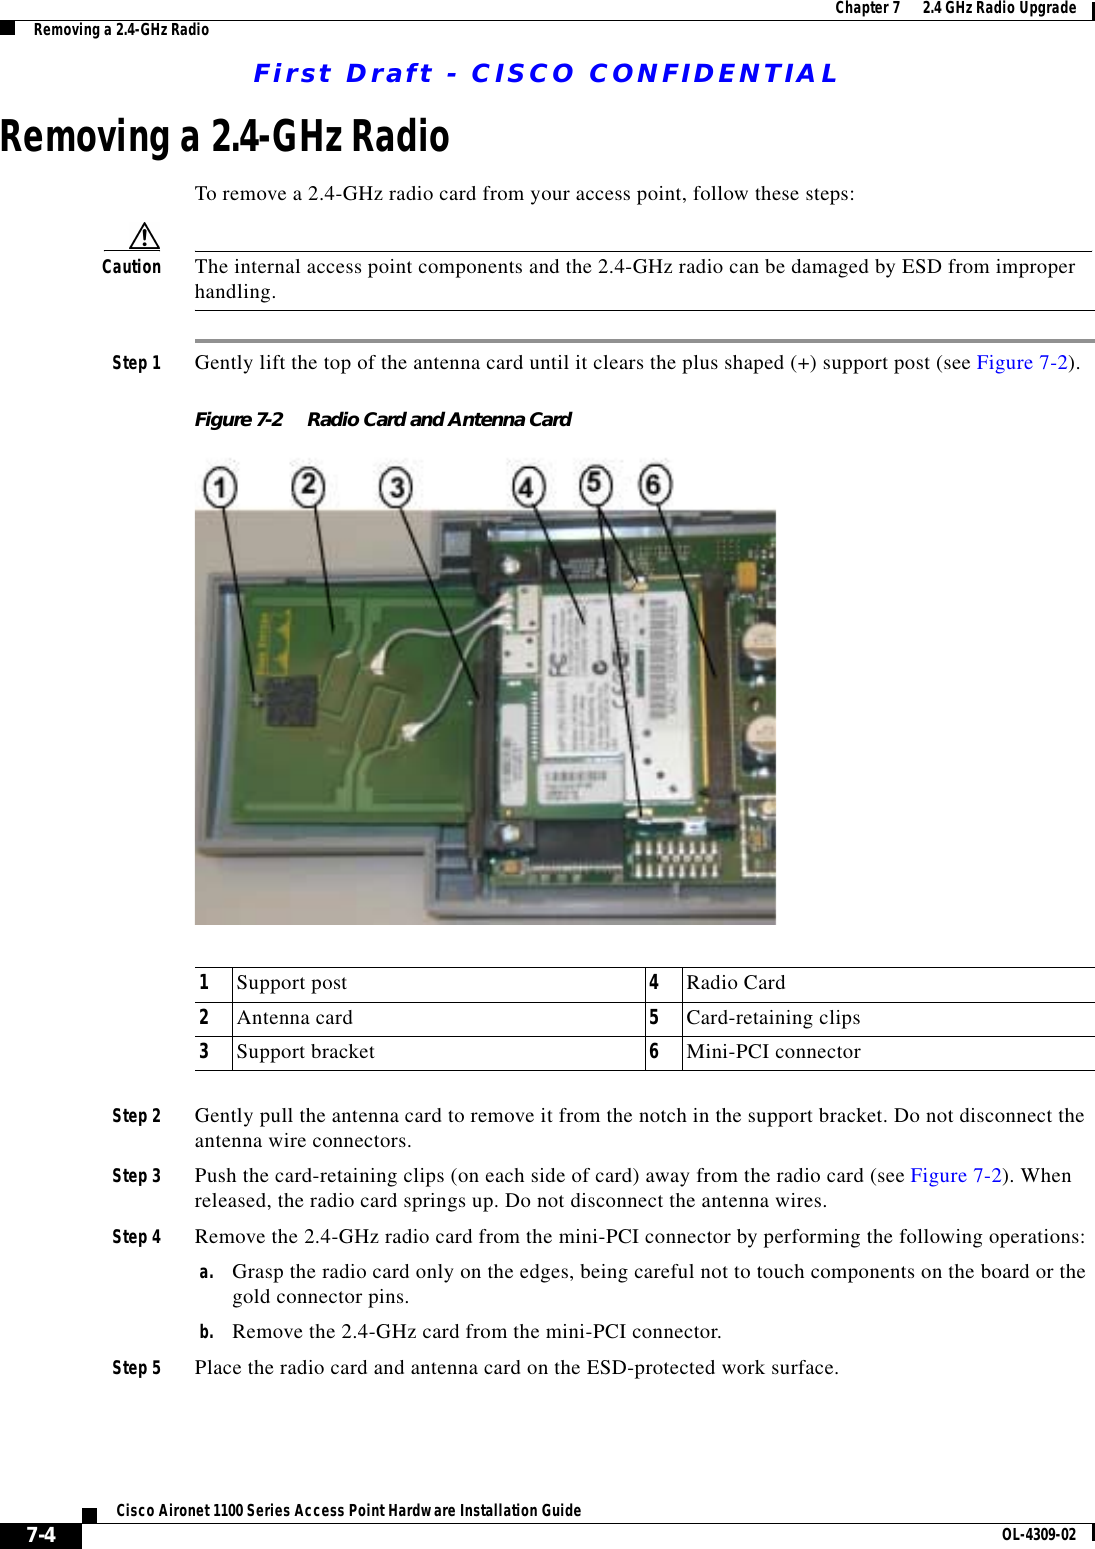 First Draft - CISCO CONFIDENTIAL7-4Cisco Aironet 1100 Series Access Point Hardware Installation Guide OL-4309-02Chapter 7      2.4 GHz Radio UpgradeRemoving a 2.4-GHz RadioRemoving a 2.4-GHz RadioTo remove a 2.4-GHz radio card from your access point, follow these steps:Caution The internal access point components and the 2.4-GHz radio can be damaged by ESD from improper handling. Step 1 Gently lift the top of the antenna card until it clears the plus shaped (+) support post (see Figure 7-2).Figure 7-2 Radio Card and Antenna CardStep 2 Gently pull the antenna card to remove it from the notch in the support bracket. Do not disconnect the antenna wire connectors.Step 3 Push the card-retaining clips (on each side of card) away from the radio card (see Figure 7-2). When released, the radio card springs up. Do not disconnect the antenna wires.Step 4 Remove the 2.4-GHz radio card from the mini-PCI connector by performing the following operations:a. Grasp the radio card only on the edges, being careful not to touch components on the board or the gold connector pins.b. Remove the 2.4-GHz card from the mini-PCI connector.Step 5 Place the radio card and antenna card on the ESD-protected work surface.1Support post 4Radio Card2Antenna card 5Card-retaining clips3Support bracket 6Mini-PCI connector